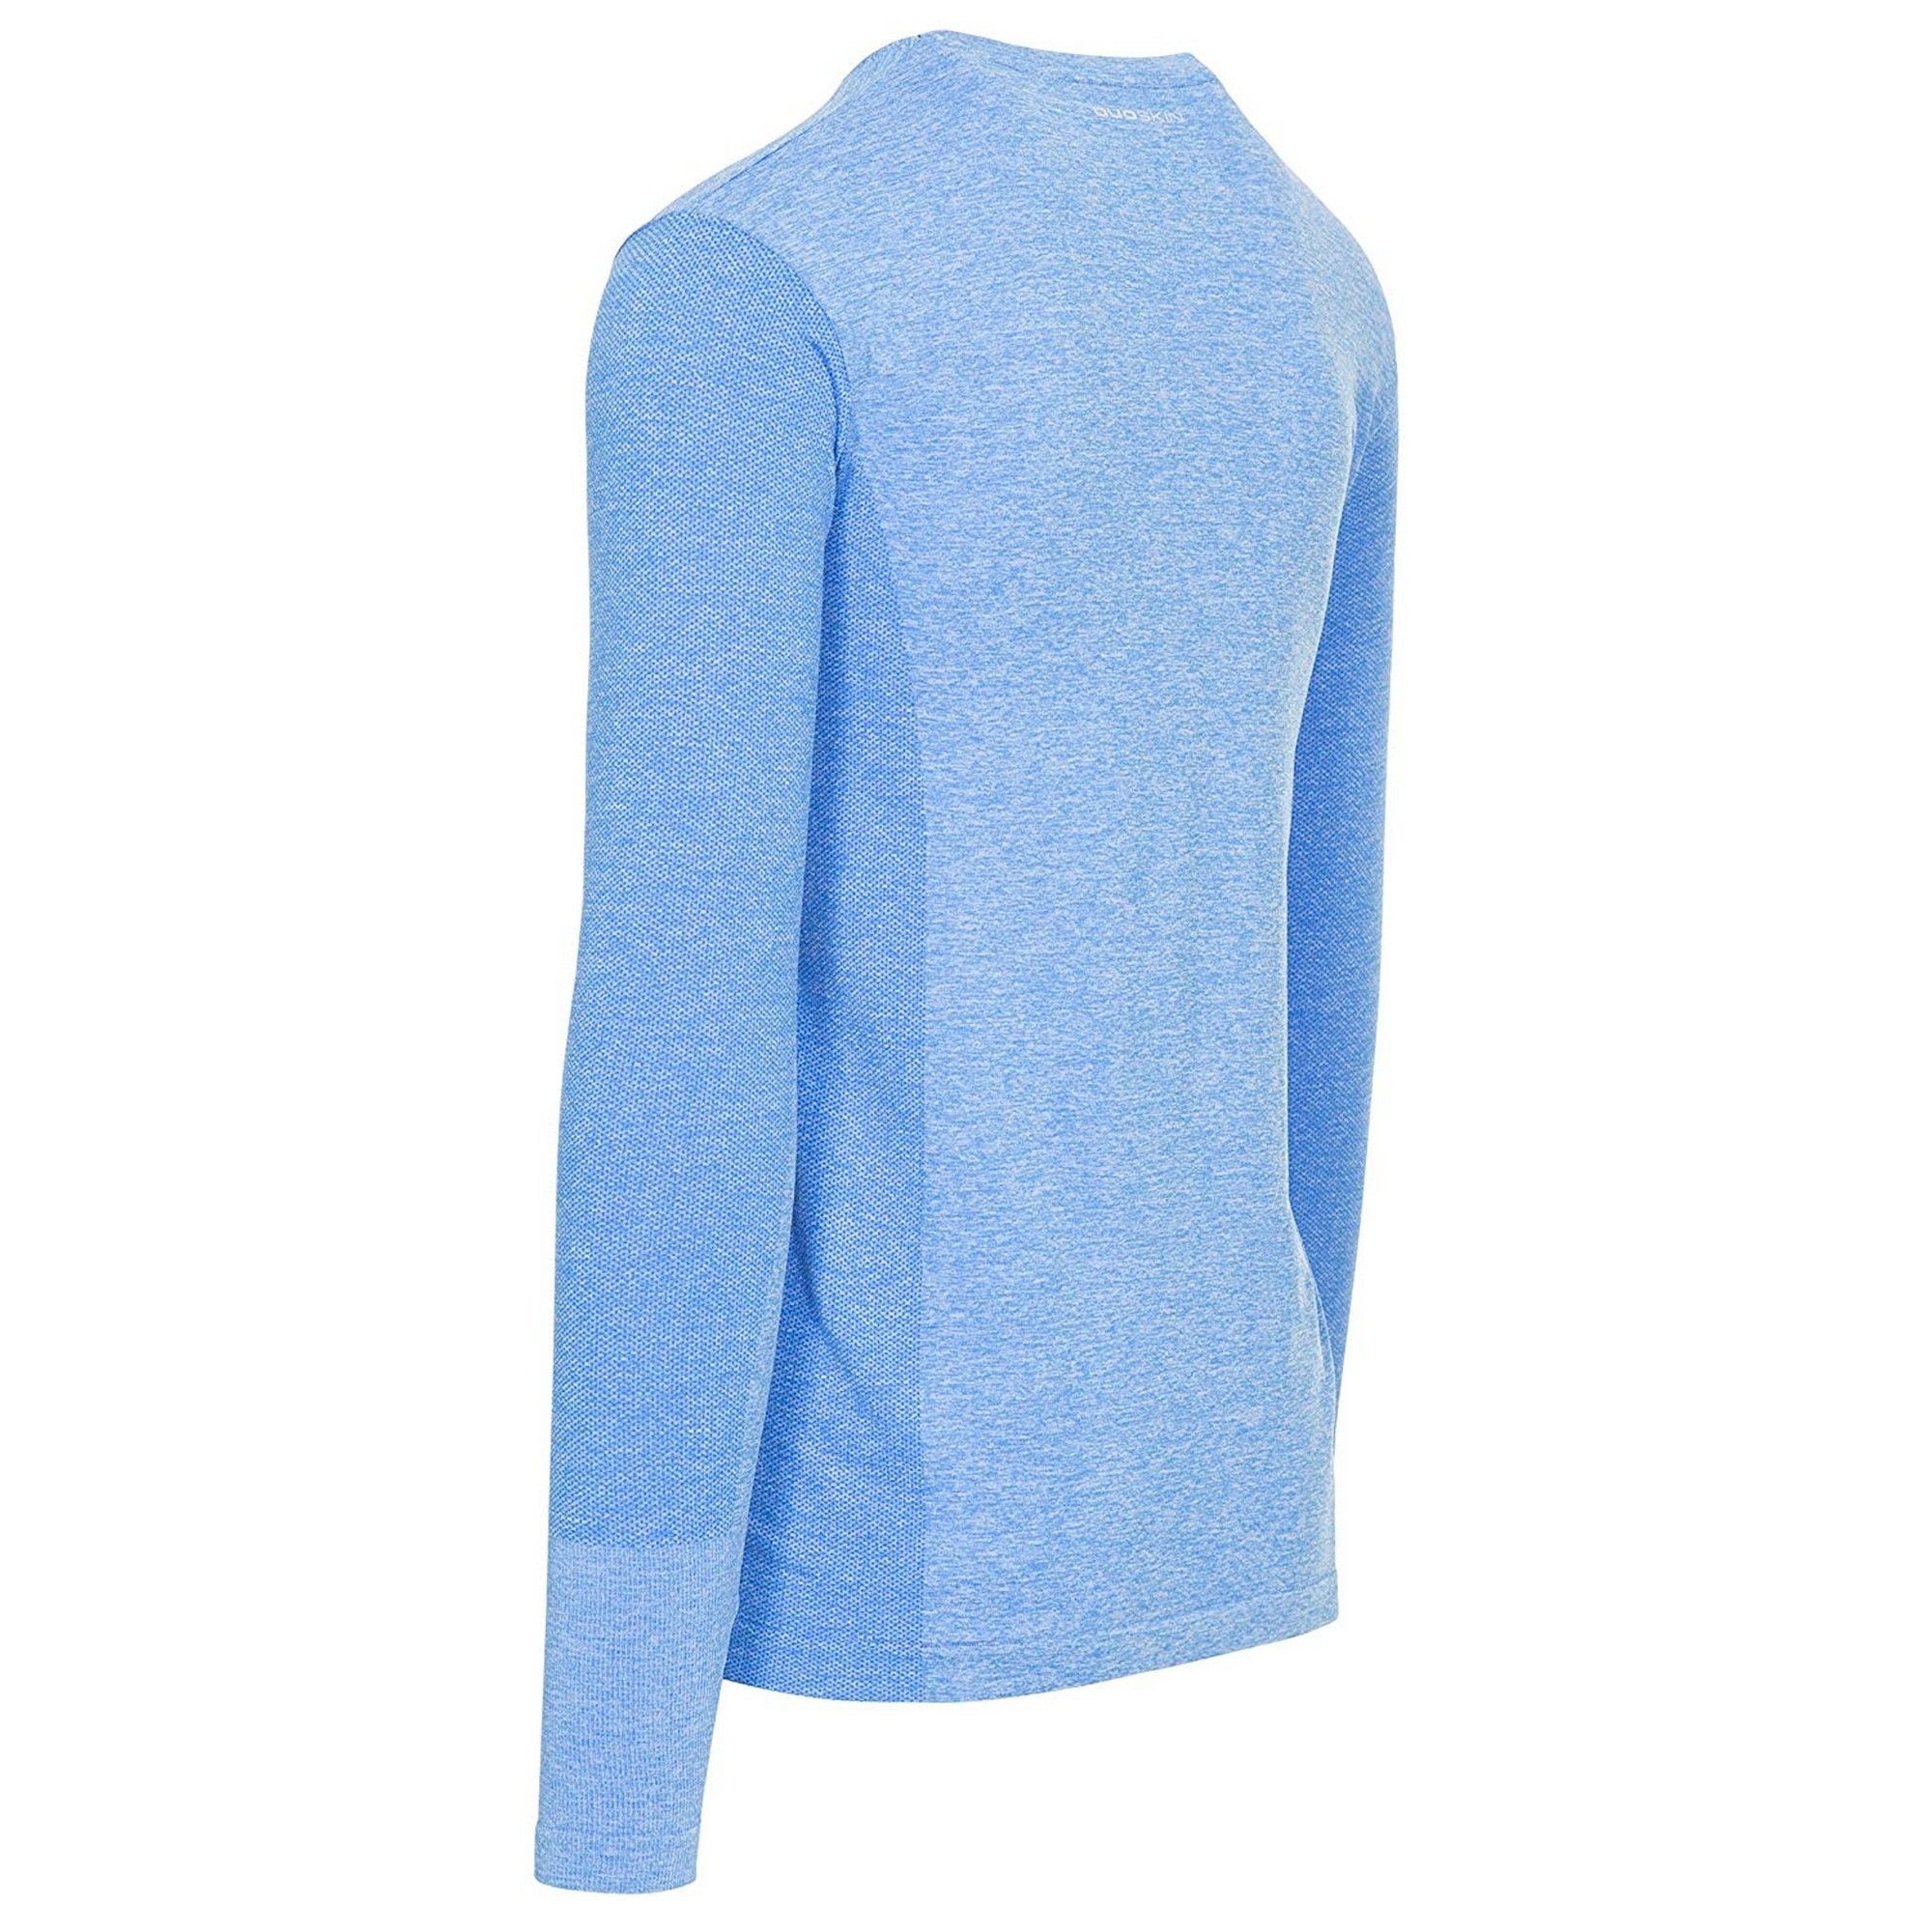 Seamless. Long sleeve. Round neck. Contrast panels. Reflective printed logos.  finish. Wicking. Quick dry. 59% Polyamide/36% Polyester/5% Elastane. Trespass Mens Chest Sizing (approx): S - 35-37in/89-94cm, M - 38-40in/96.5-101.5cm, L - 41-43in/104-109cm, XL - 44-46in/111.5-117cm, XXL - 46-48in/117-122cm, 3XL - 48-50in/122-127cm.